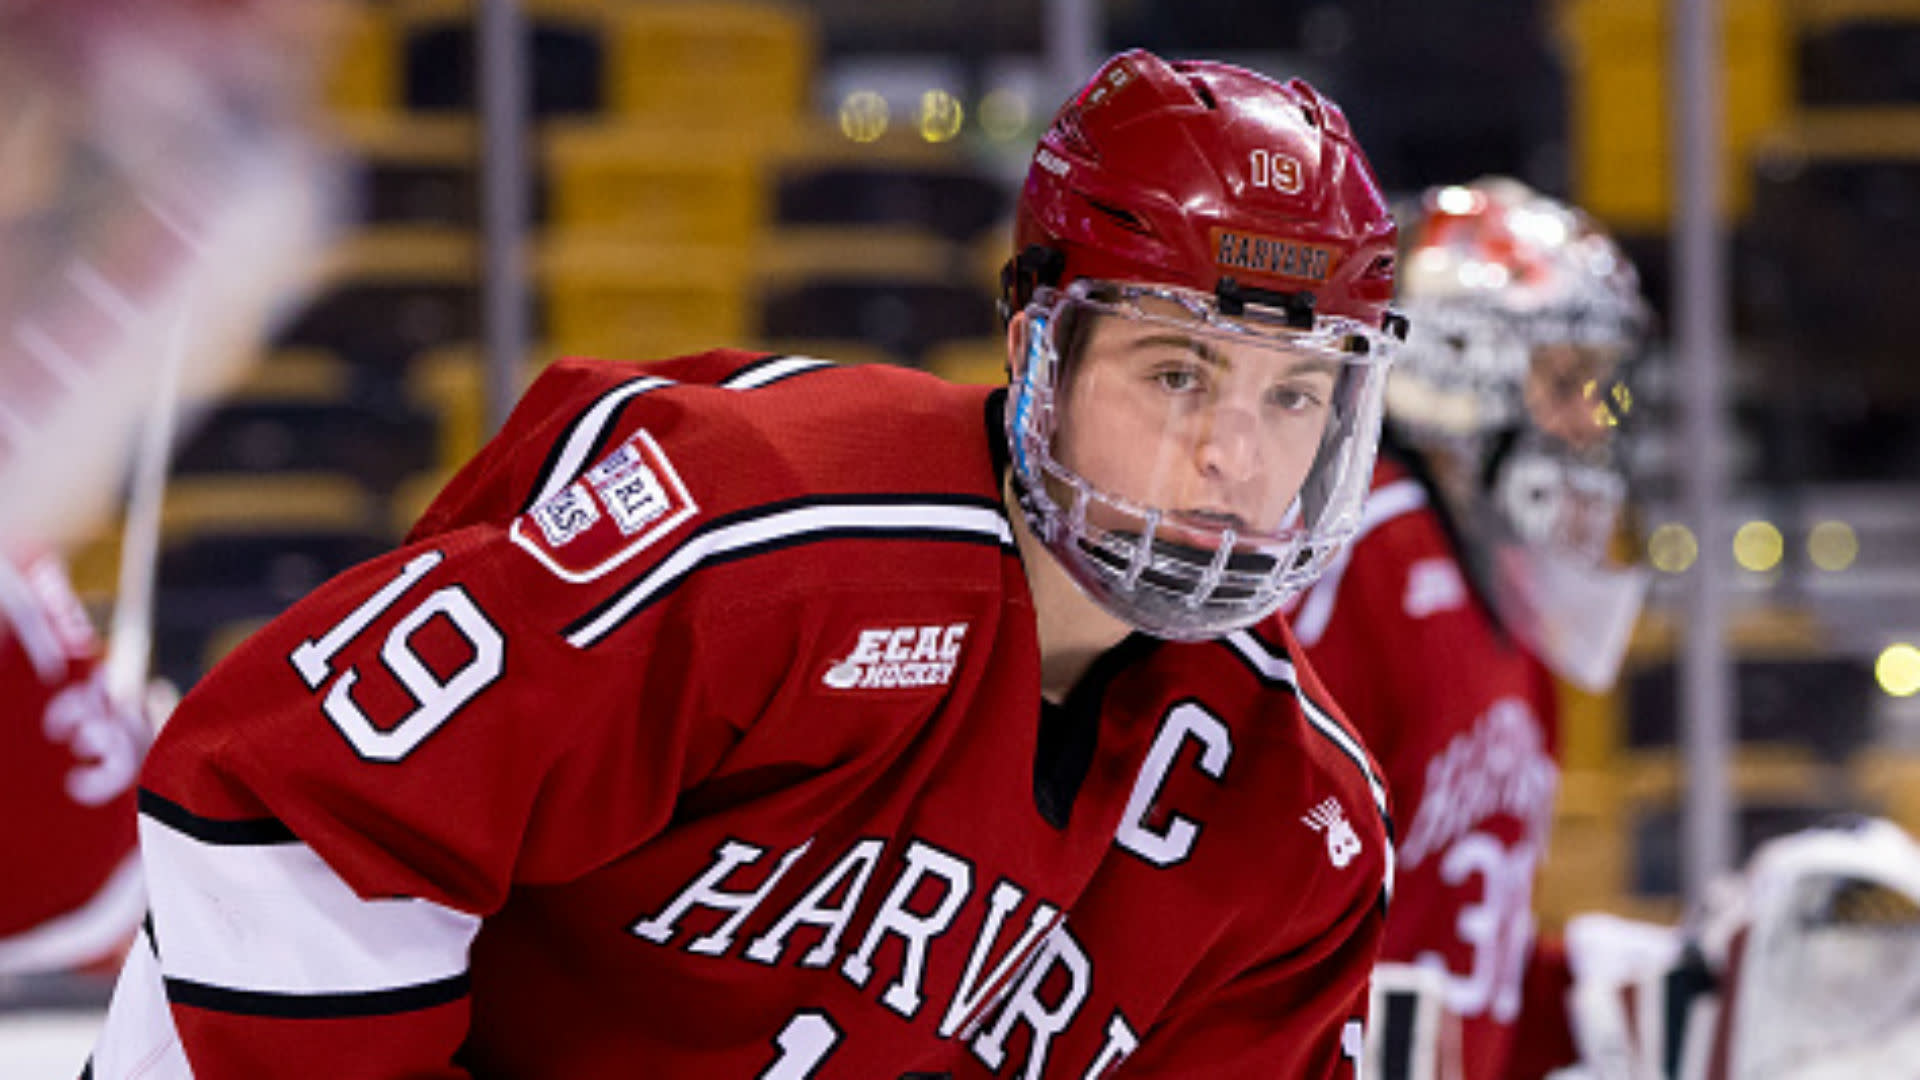 Top college player Jimmy Vesey signs with Rangers